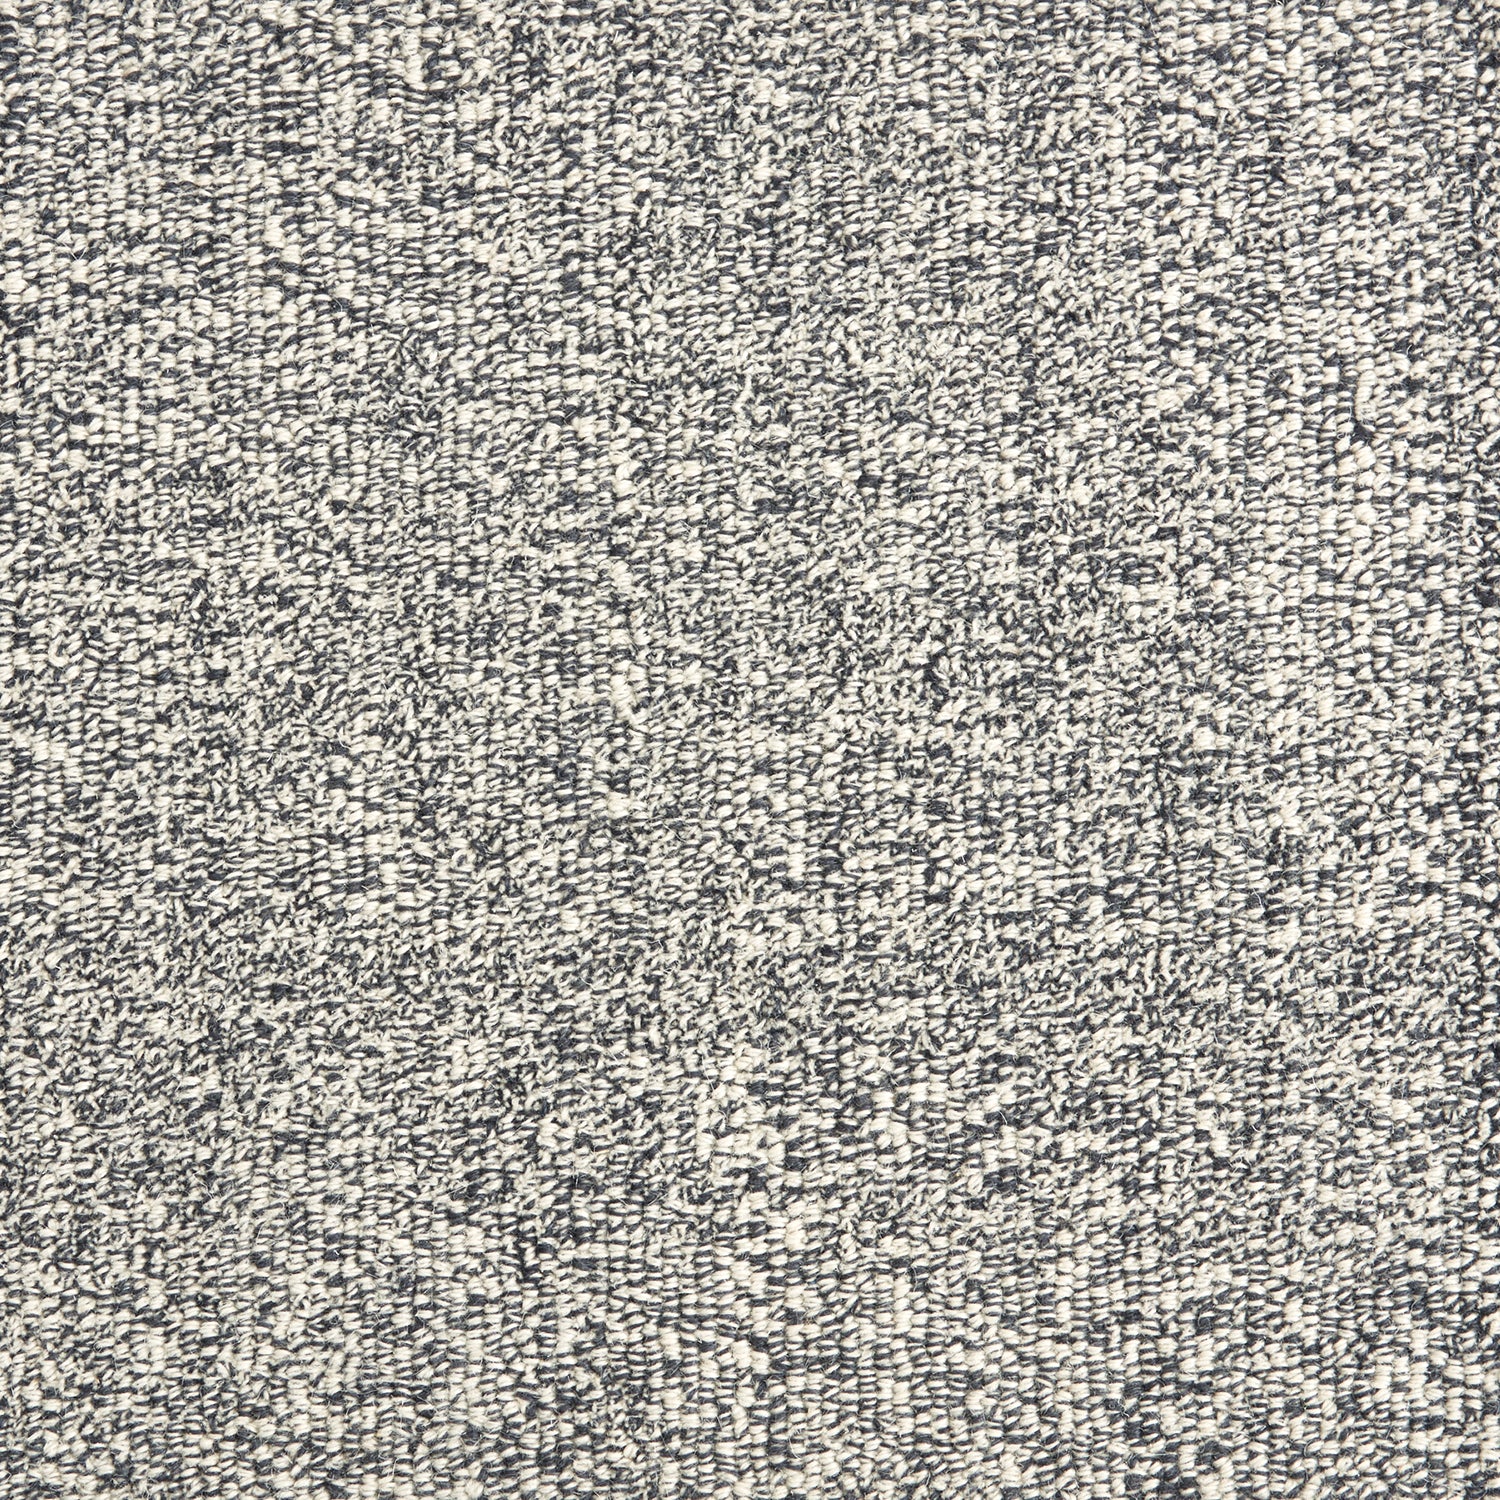 Wool broadloom carpet swatch in a textured weave in mottled white and charcoal.